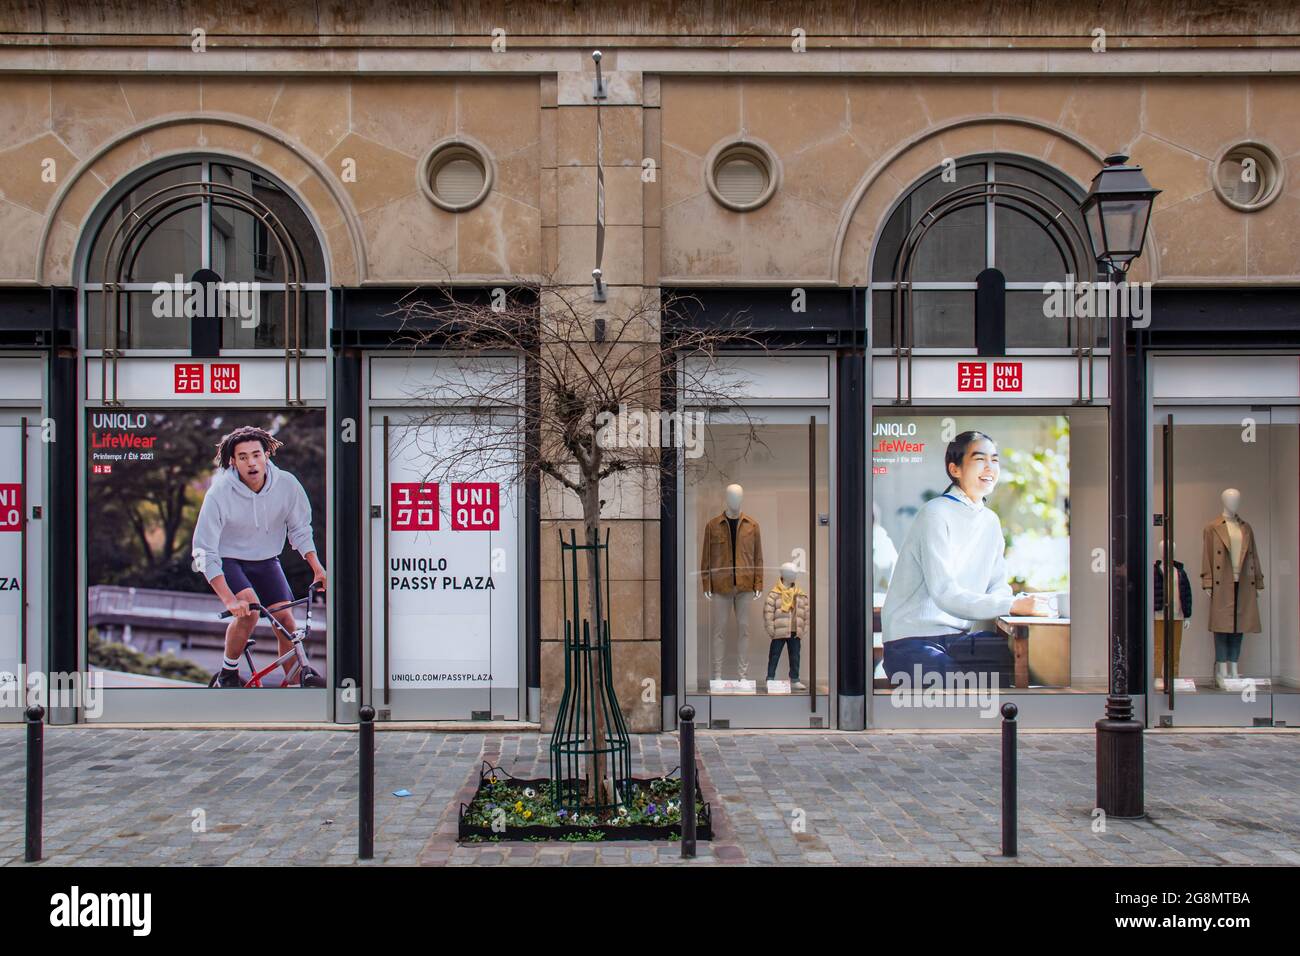 PARIS, FRANCE - Jul 12, 2021: The Japanese Uniqlo storefront on a busy road  in Paris, France Stock Photo - Alamy